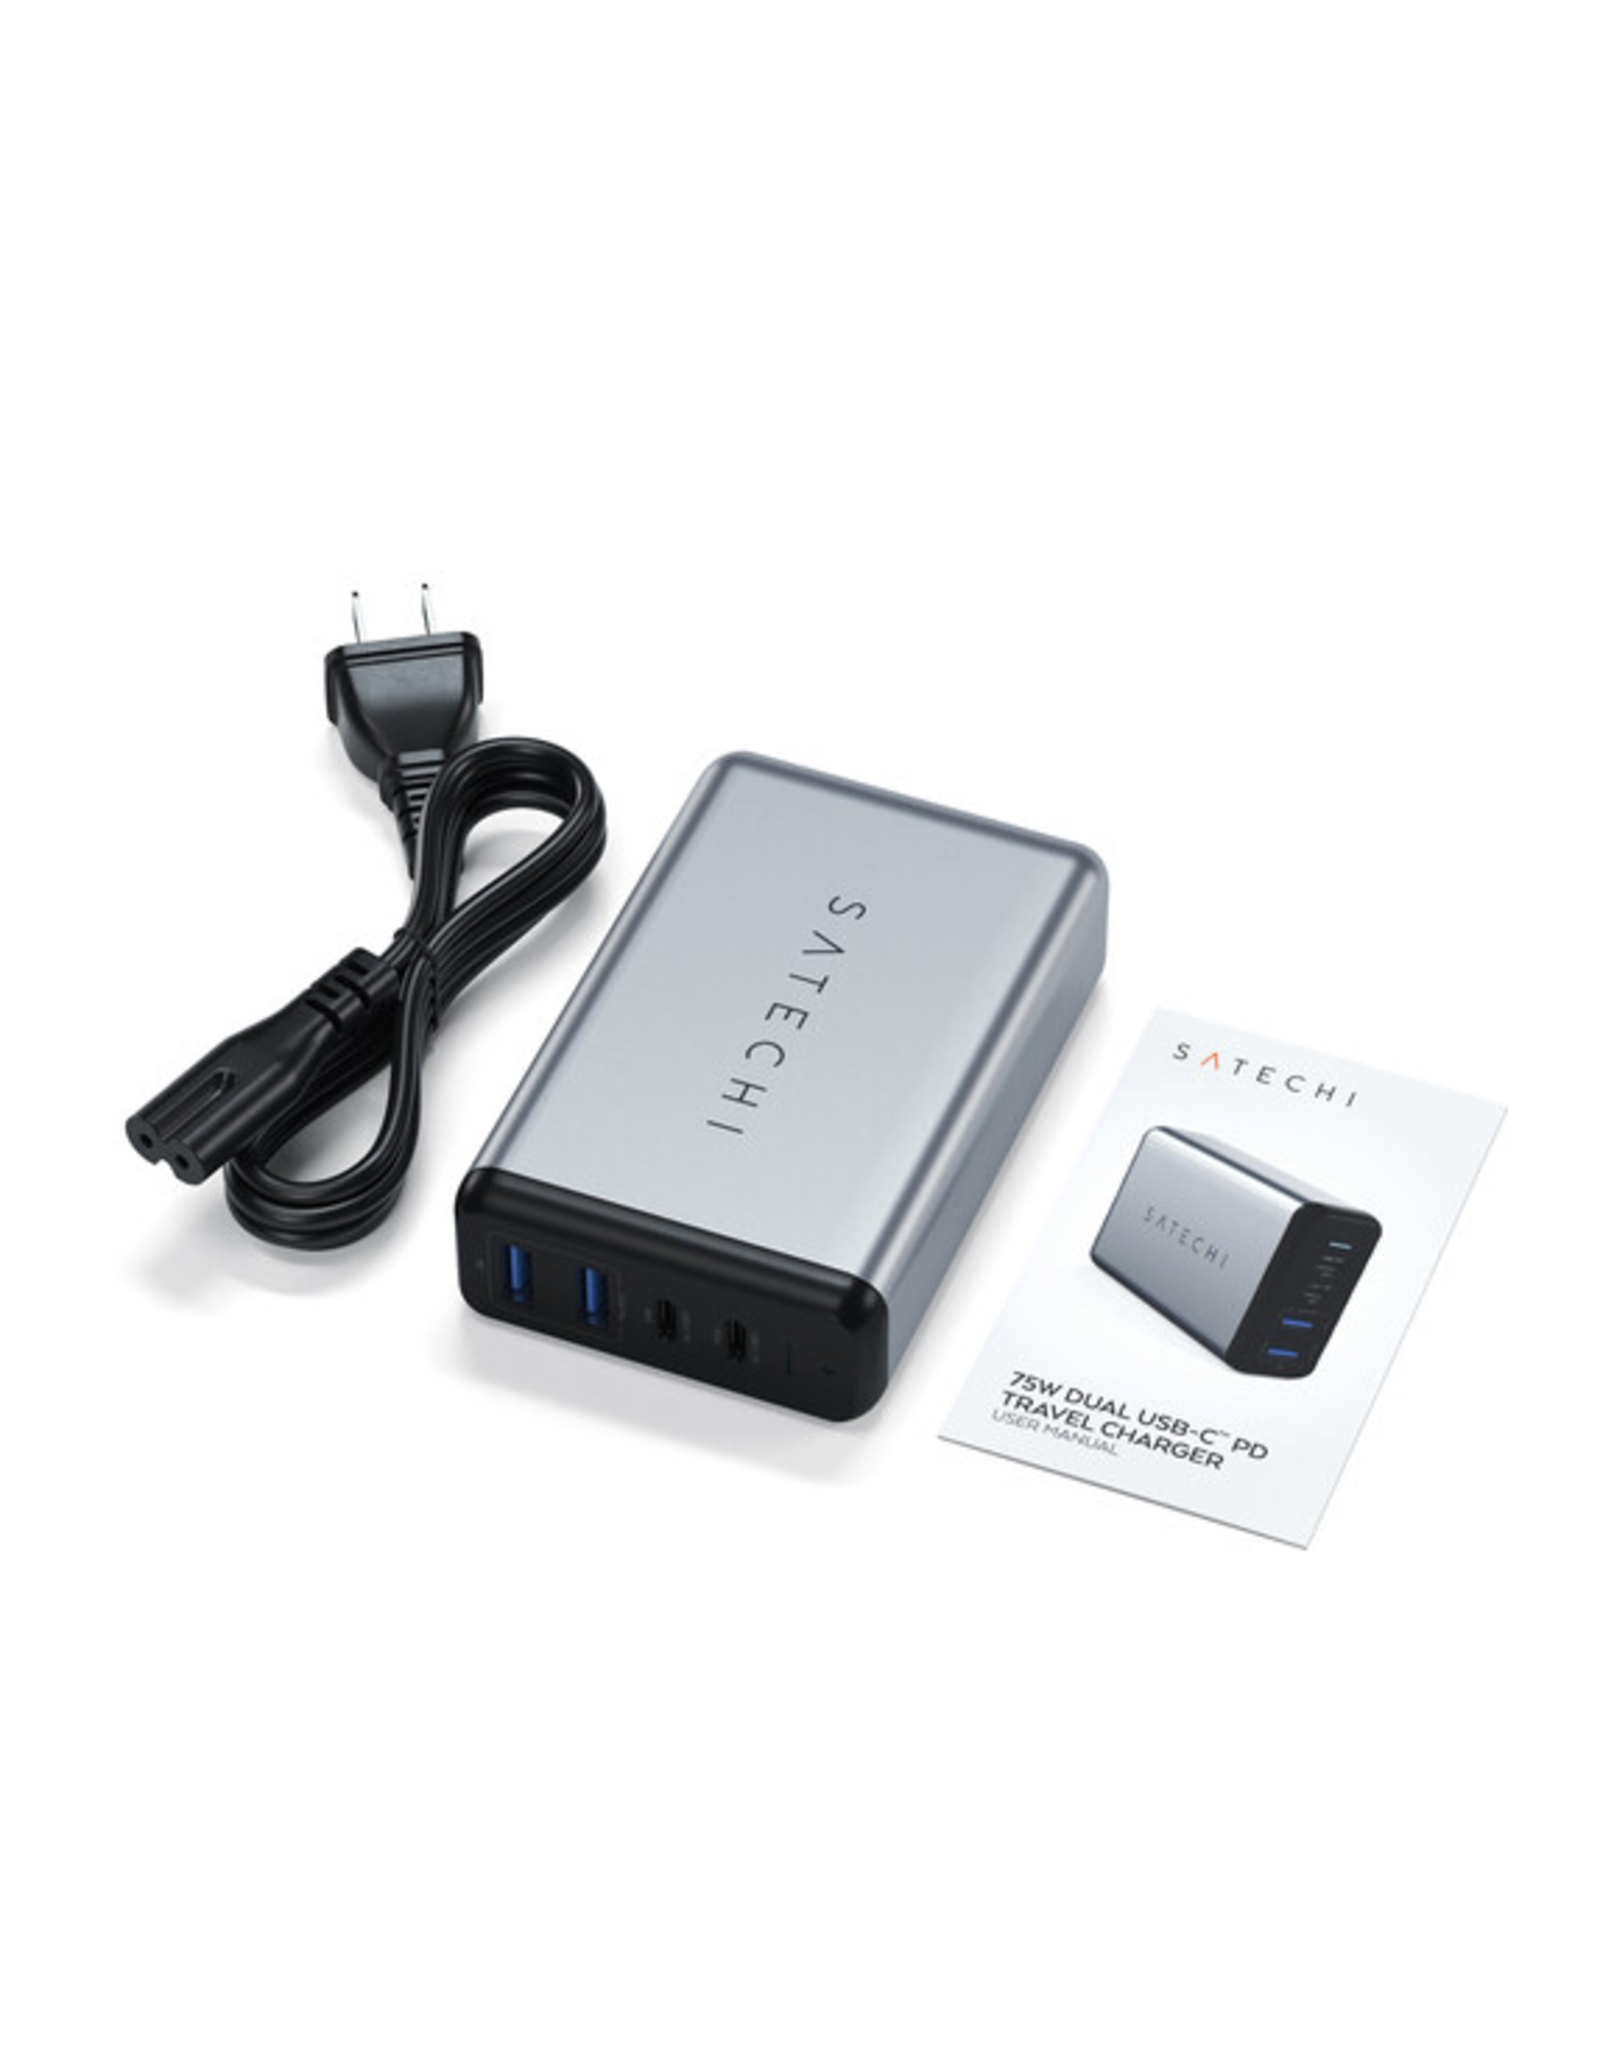 SATECHI SATECHI 75W 4-Port USB Type-C/USB Type-A PD Travel Charger